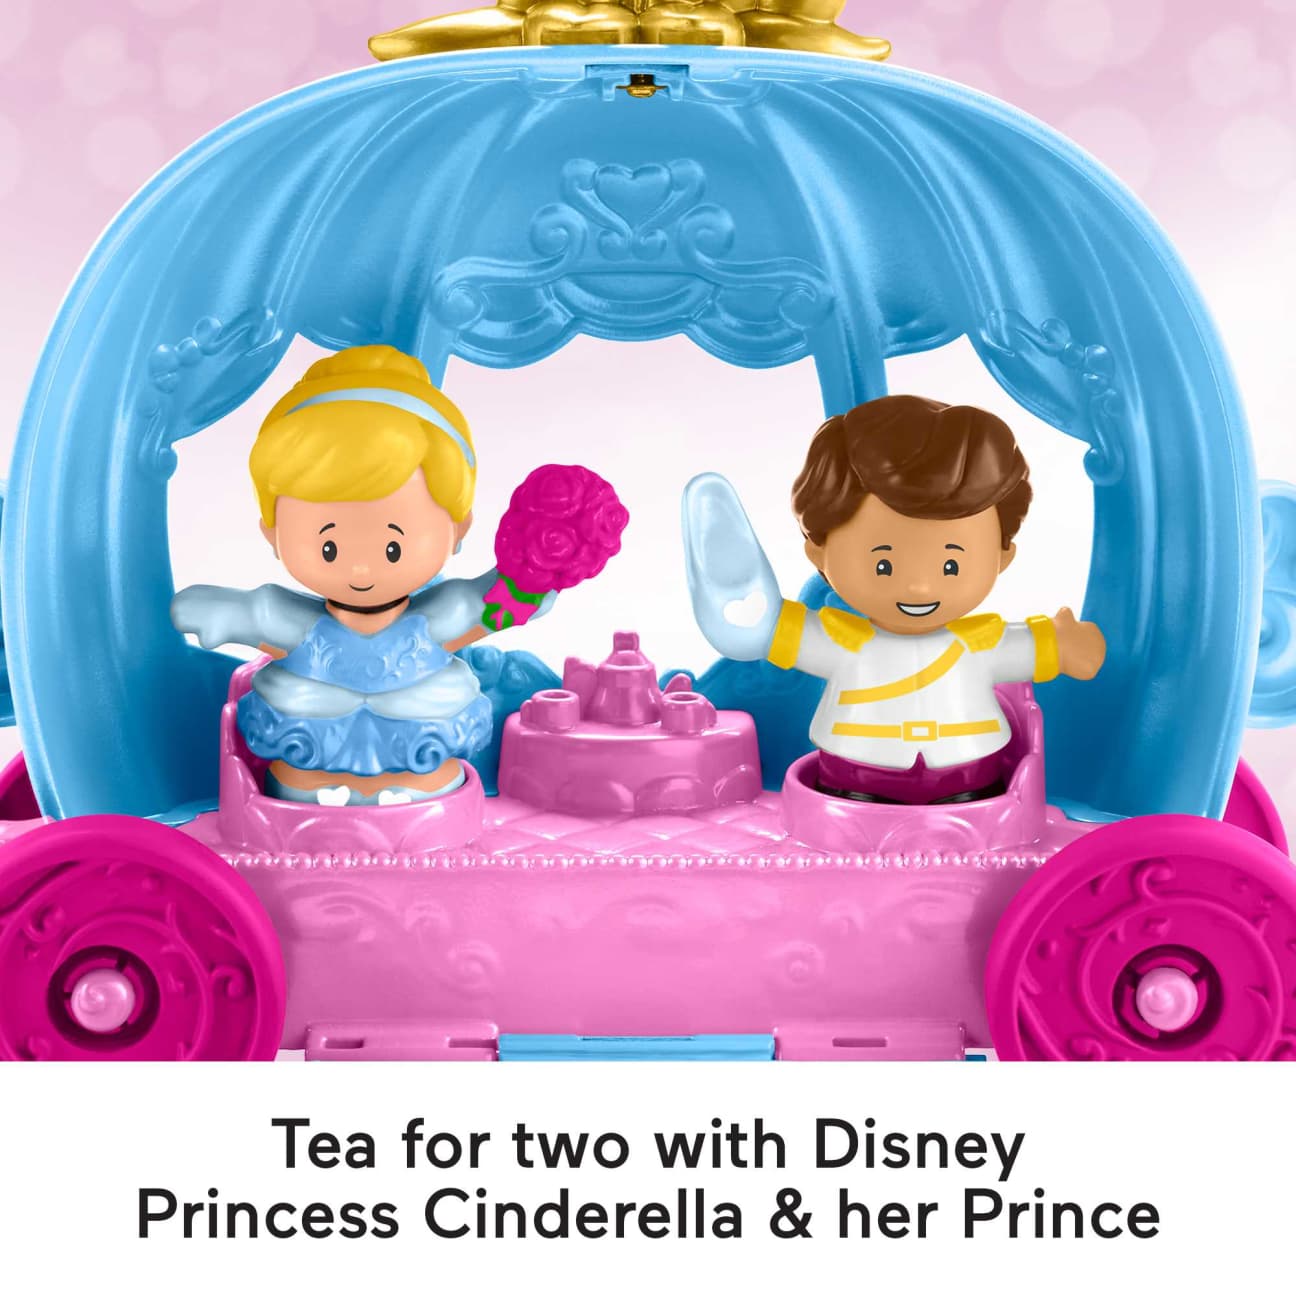 Fisher Price-Fisher-Price Little People - Disney Princess Cinderella's Dancing Carriage-HGP76-Legacy Toys